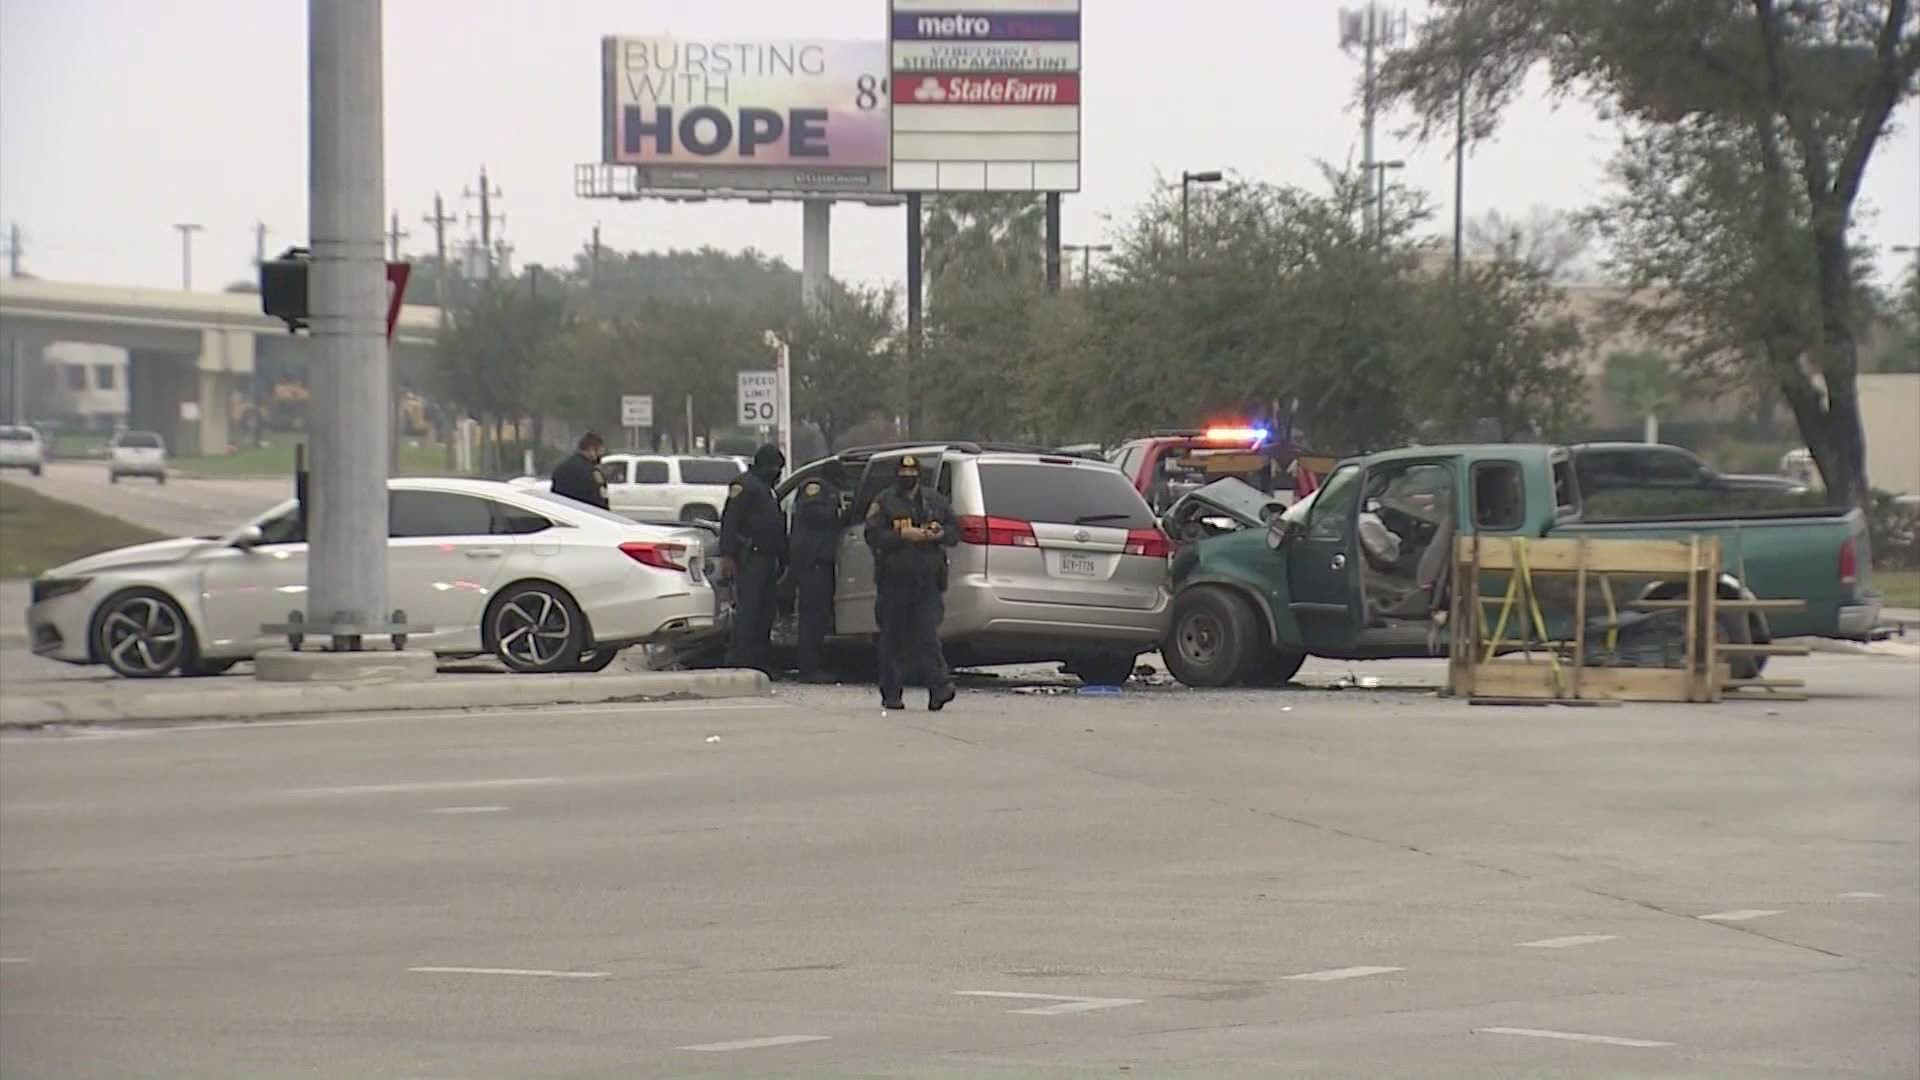 This happened around 3:15 p.m. in the 12500 block of the Northwest Freeway frontage road near Bingle.